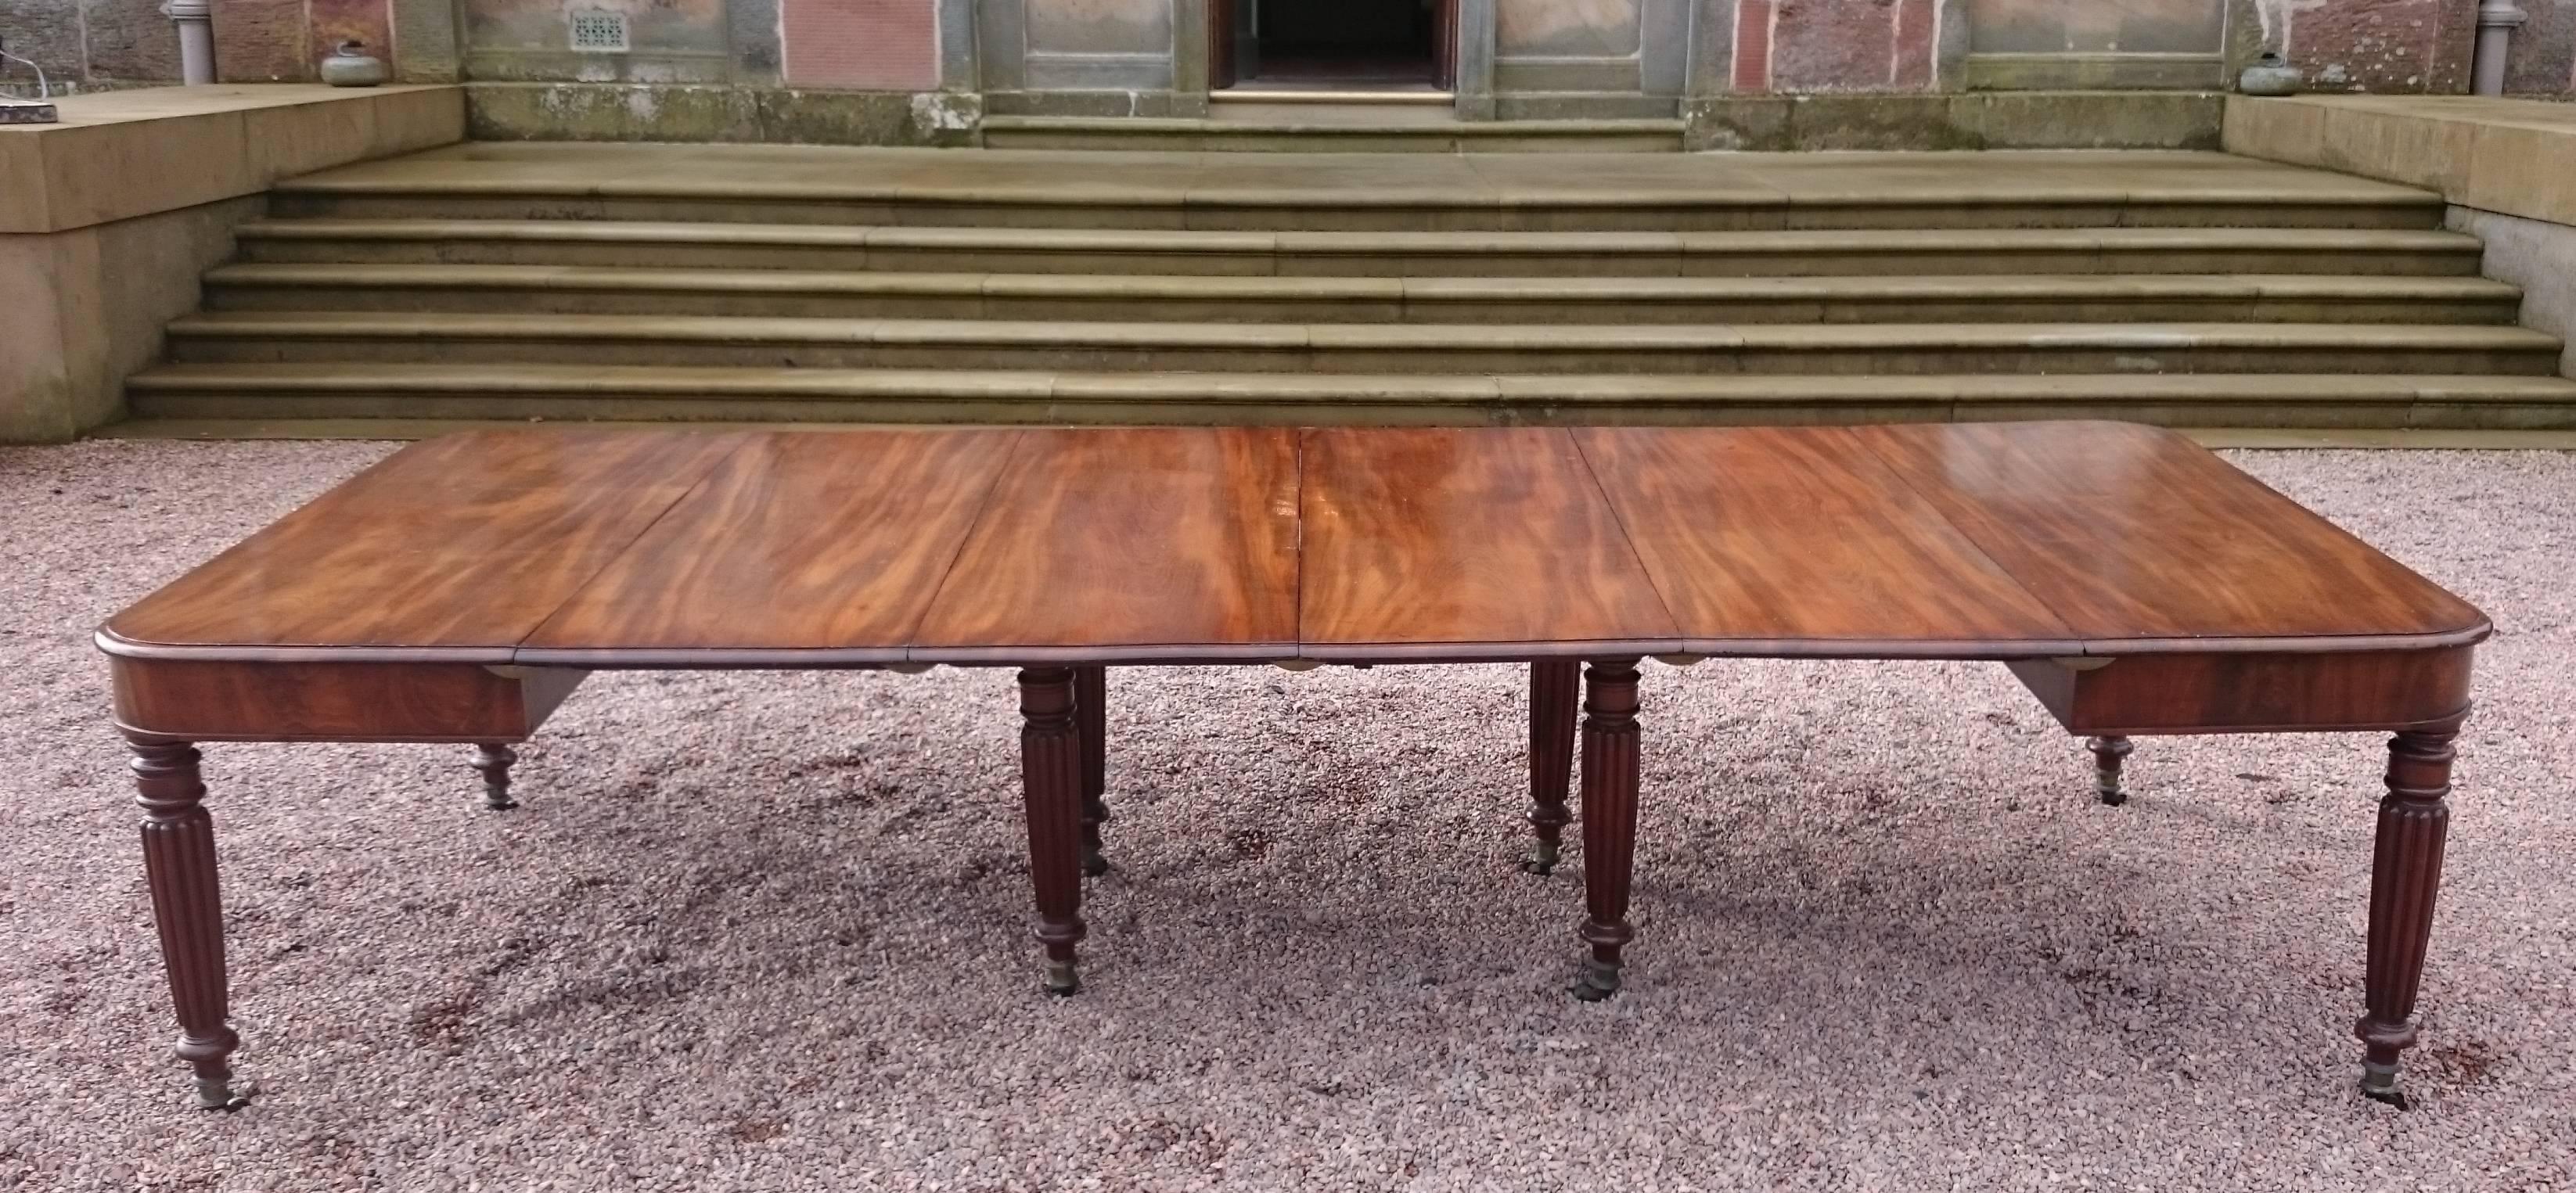 19th Century George iv Period Mahogany Antique Dining Table 1